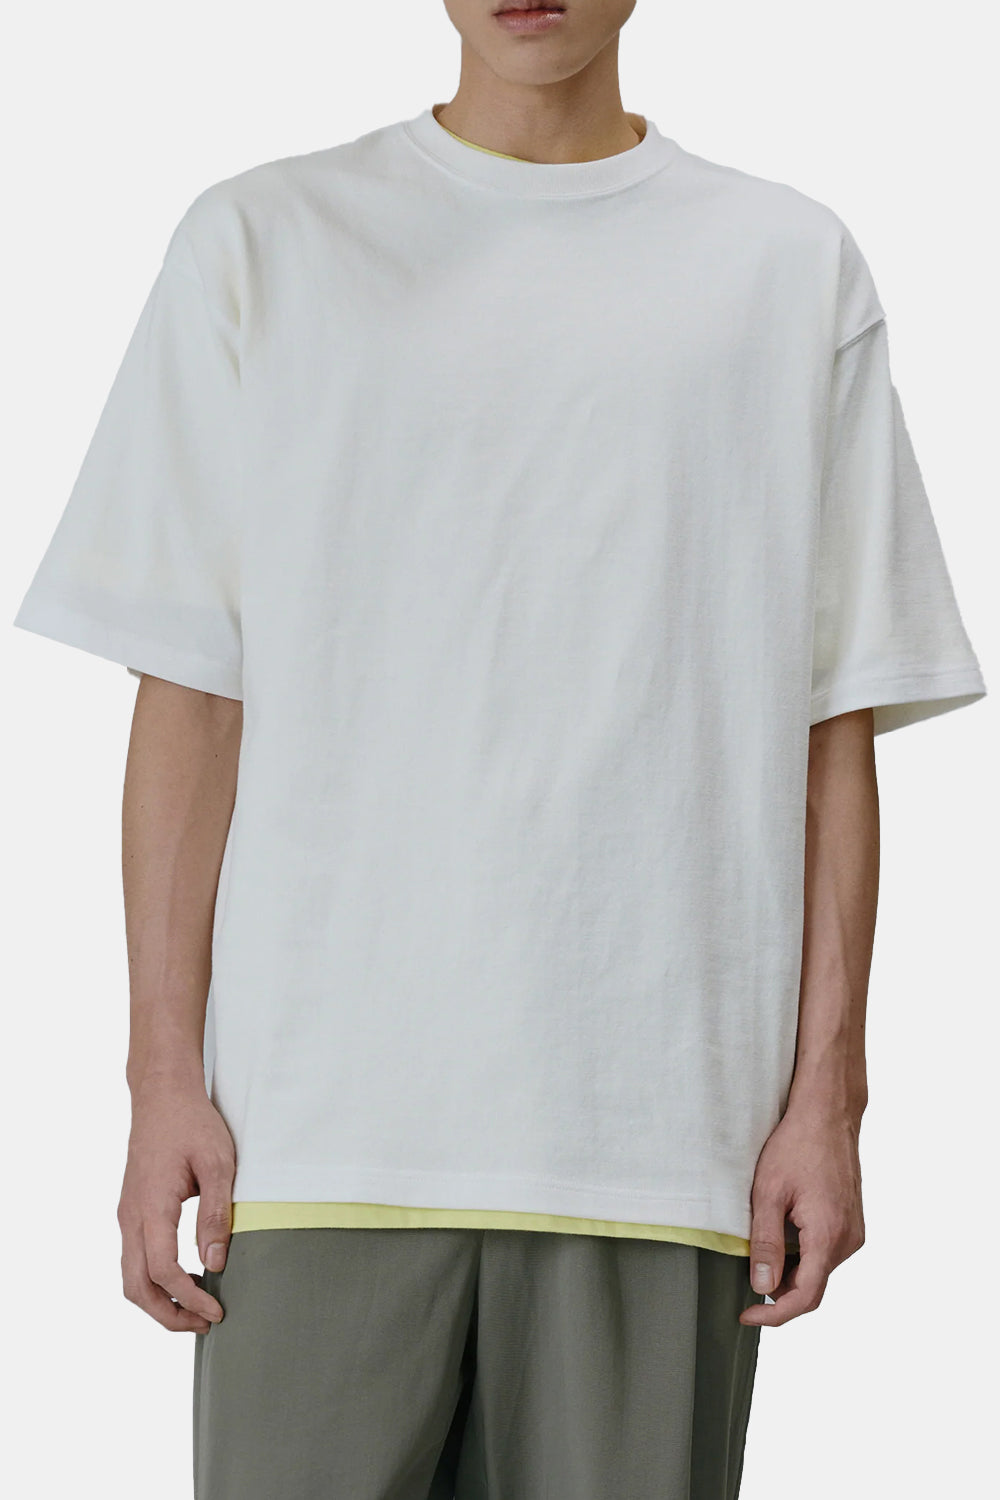 United Athle Japan Made Wide Fit T-shirt (White)